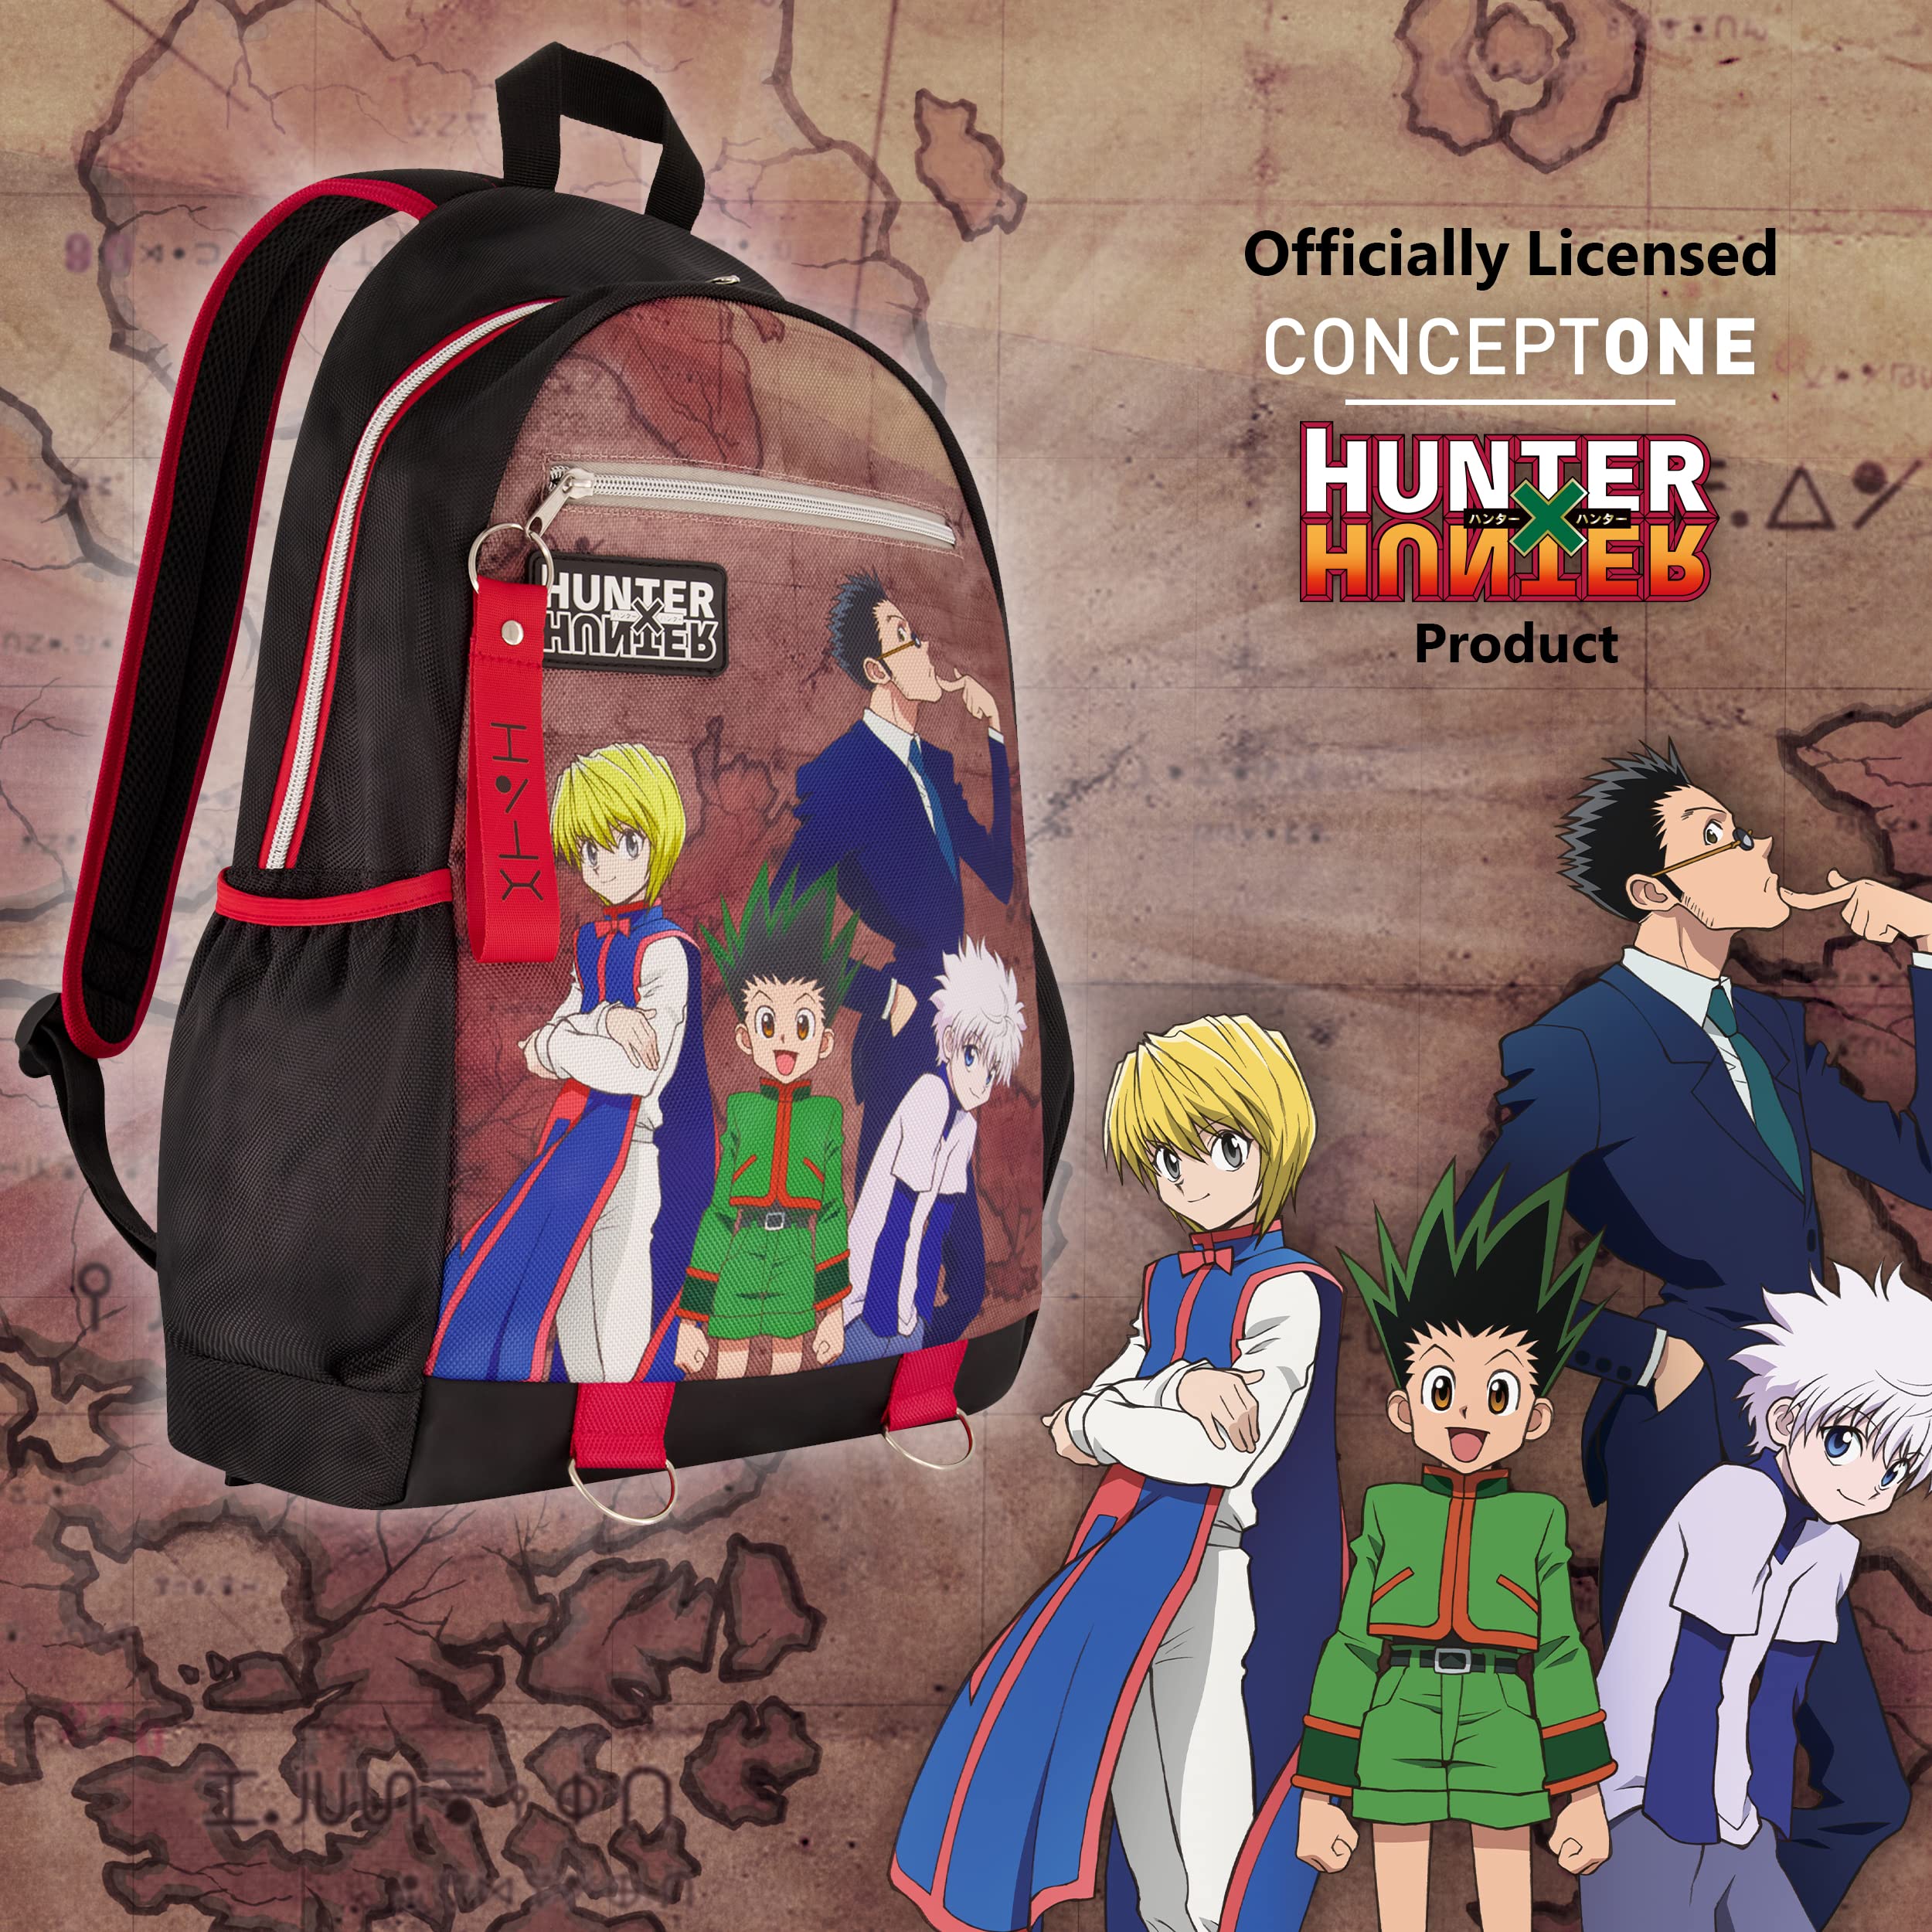 Hunter x Hunter 13 Inch Sleeve Laptop Backpack, Padded Computer Bag for Commute or Travel, Multi, One Size